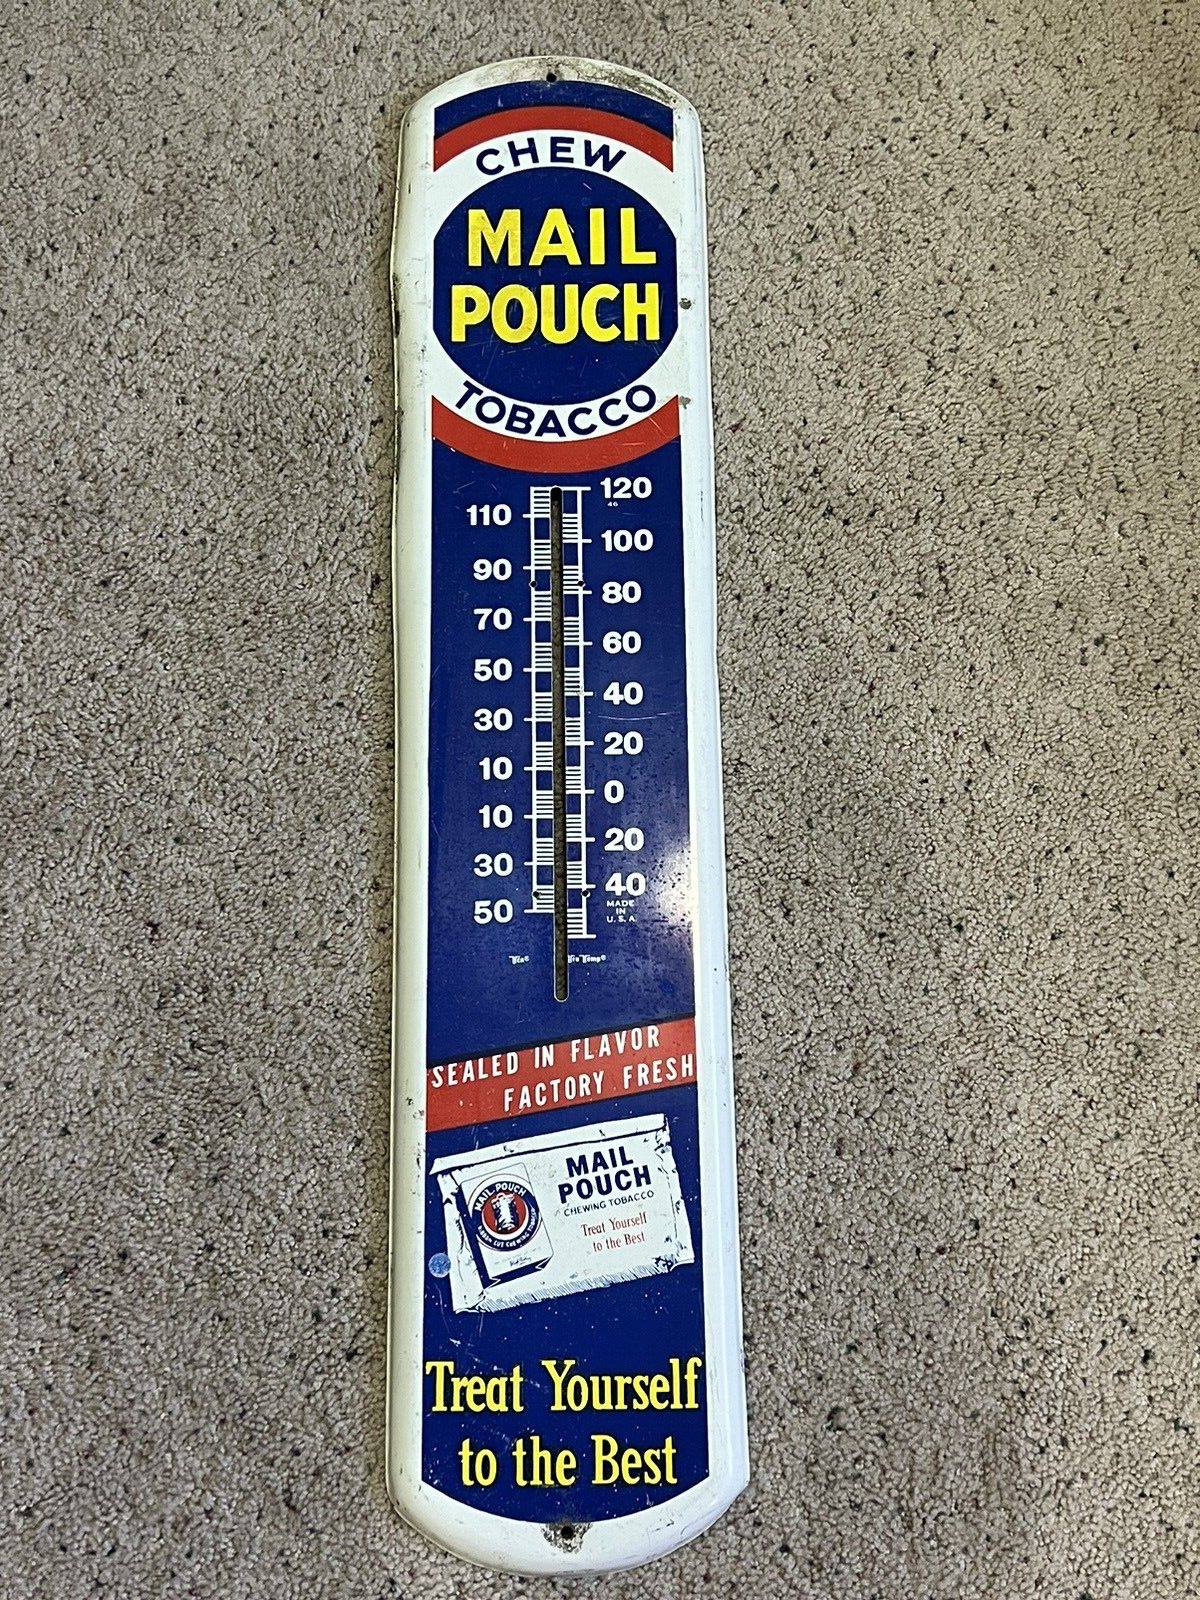 Vintage Mail Pouch Tobacco Metal Hanging Wall Thermometer / Sign 38\